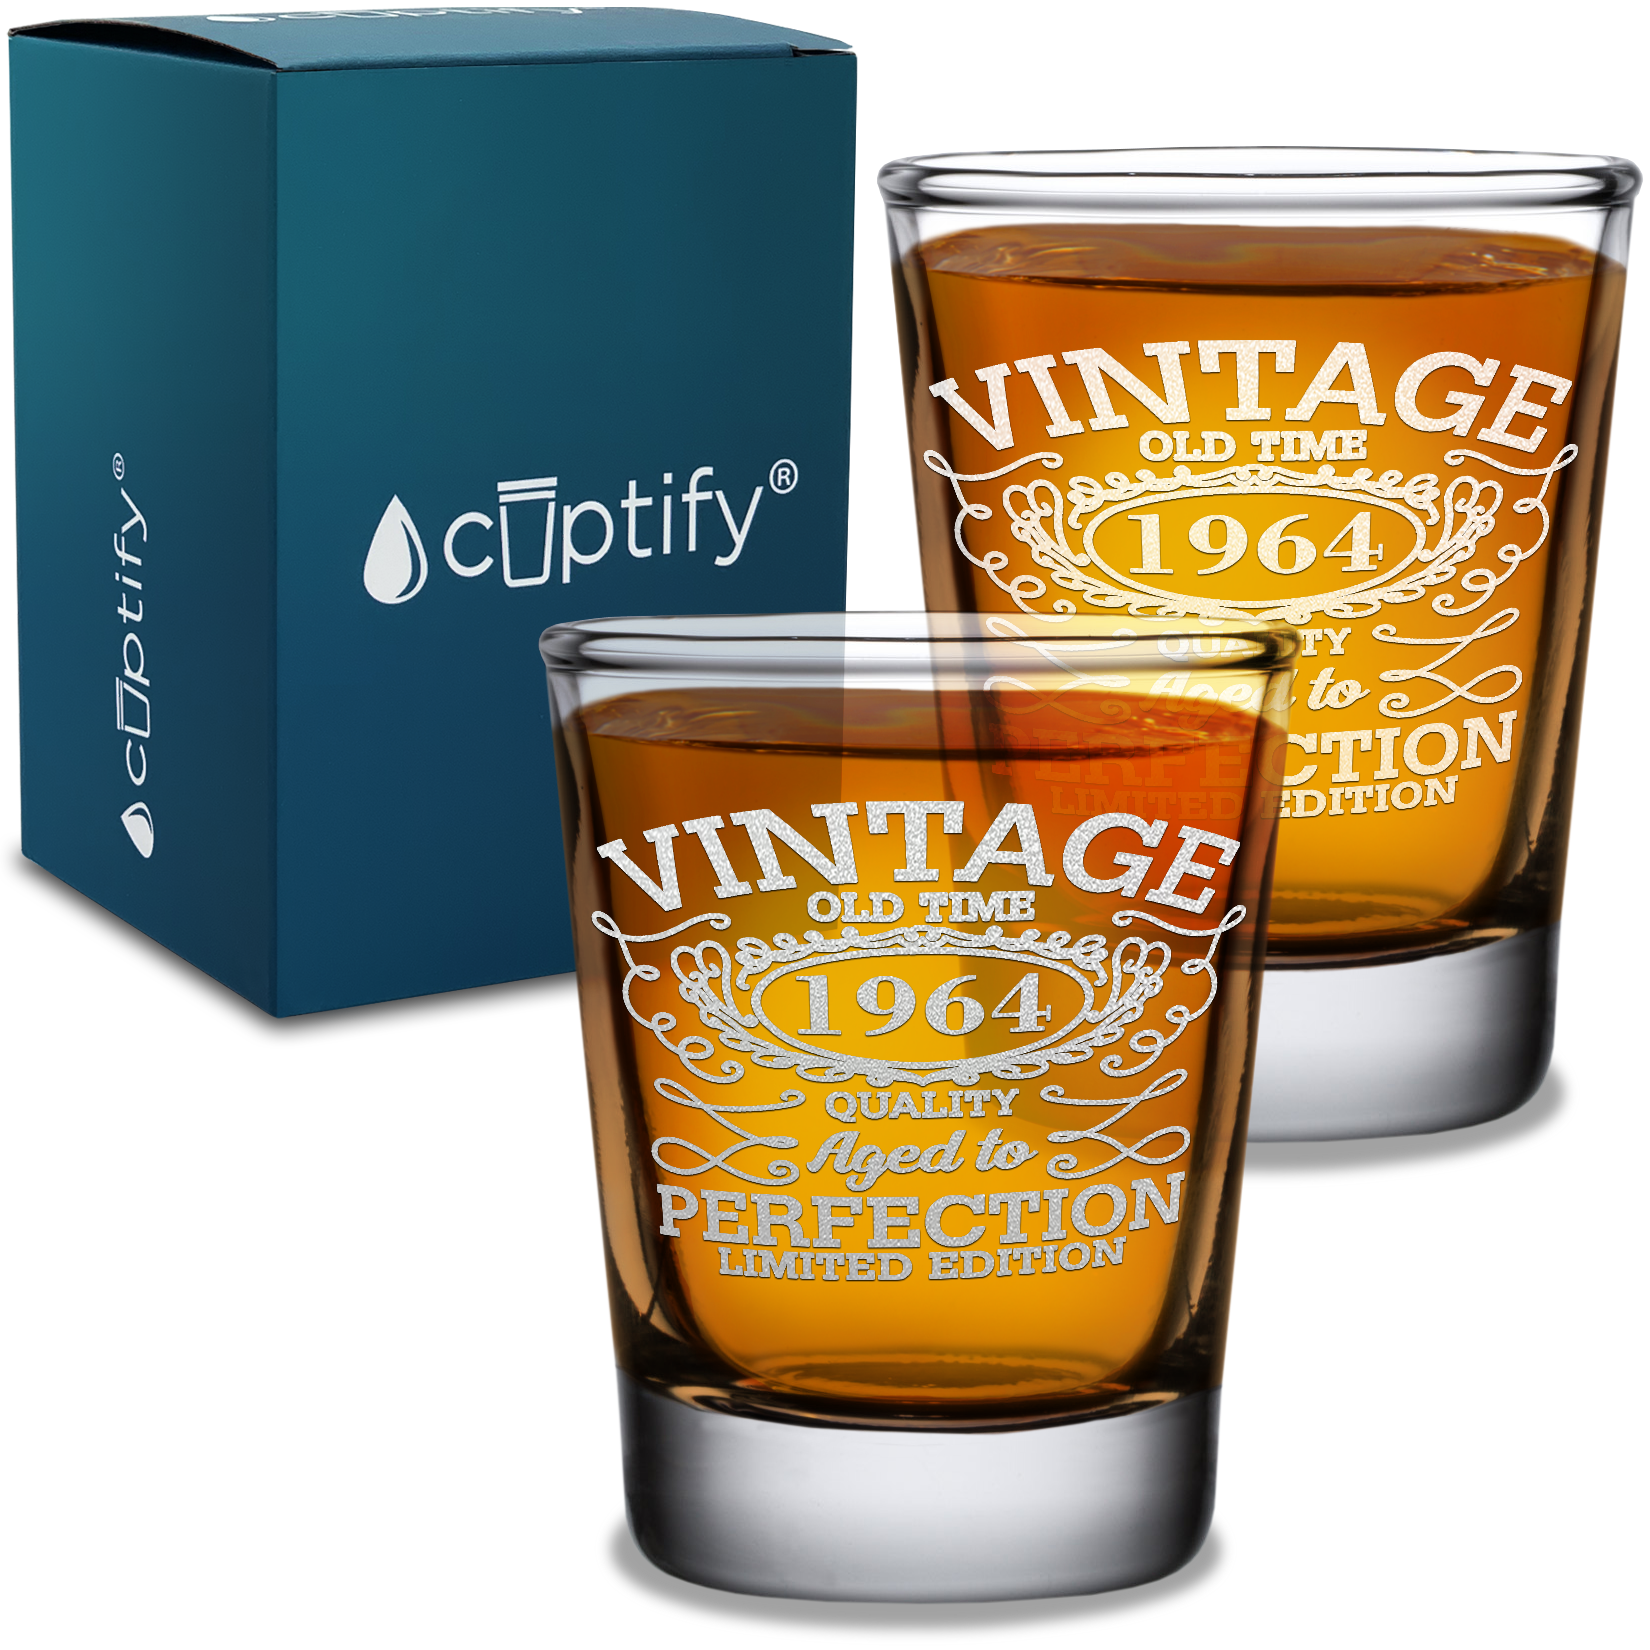 57th Birthday Vintage 57 Years Old Time 1964 Quality Laser Engraved 2oz Shot Glasses - Set of 2